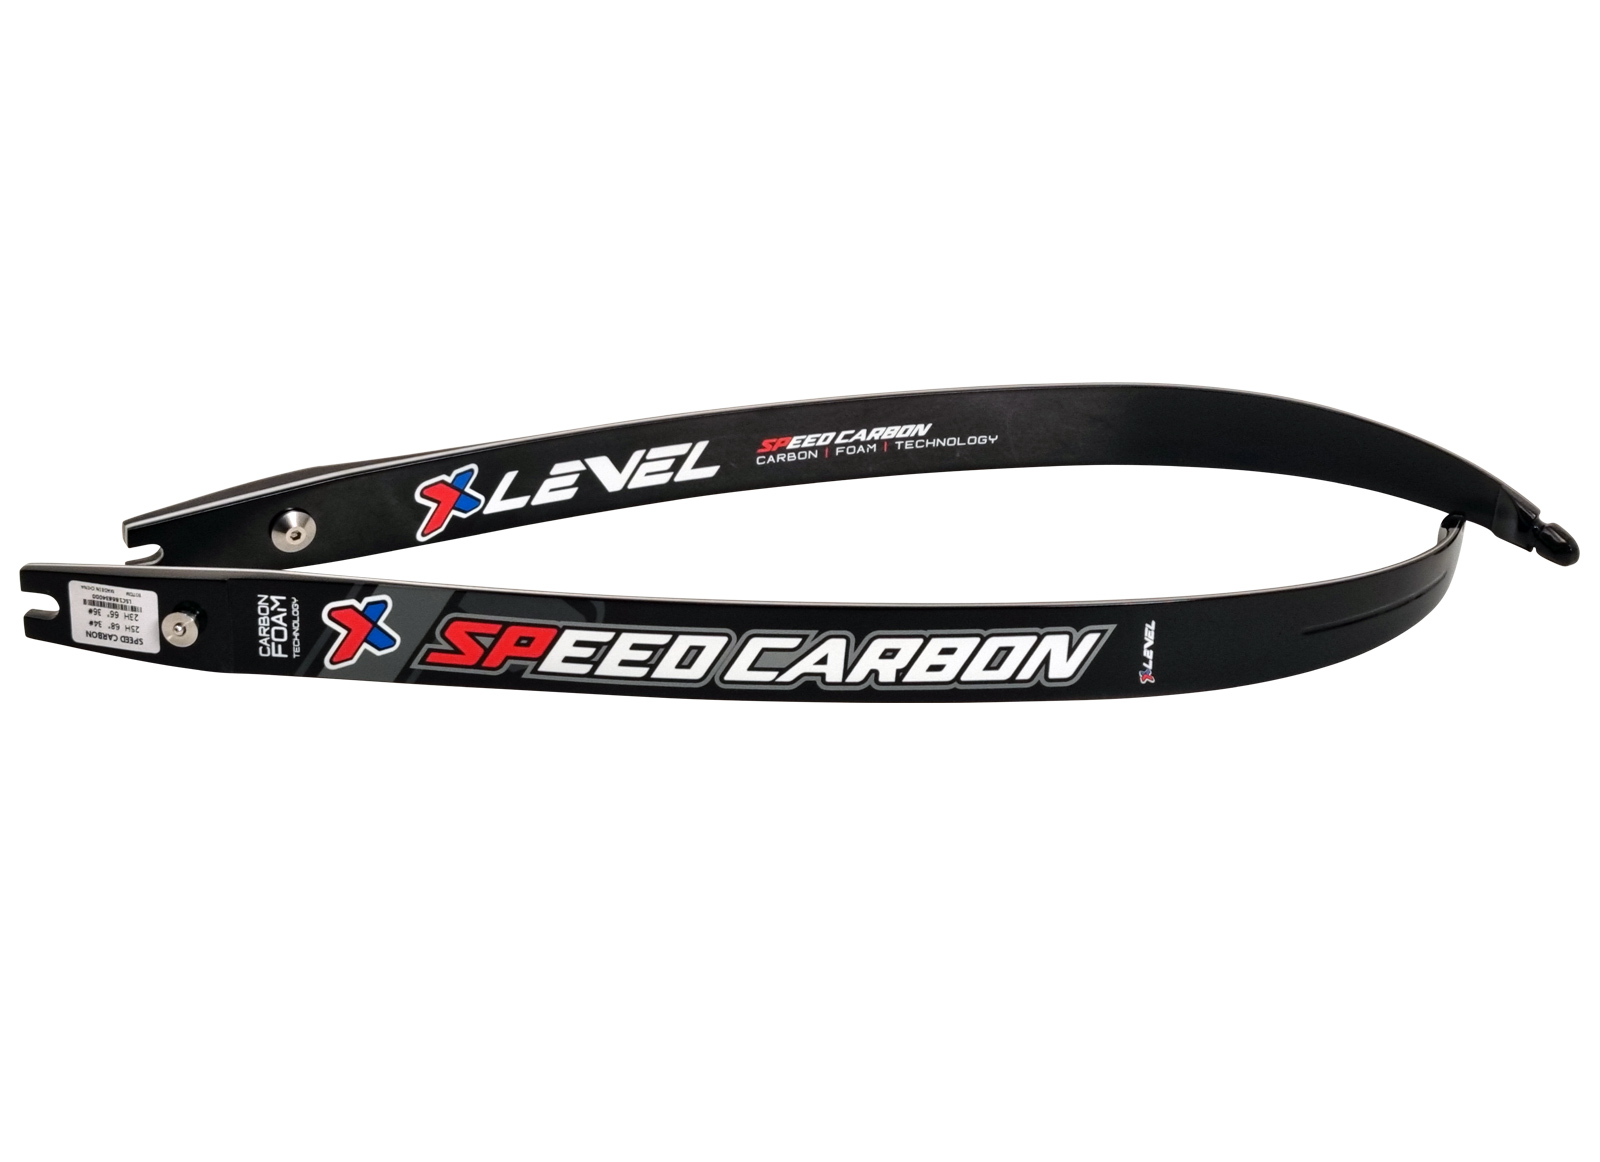 X-LEVEL LIMBS FOR OLYMPIC BOW AND BAREBOW SPEED CARBON